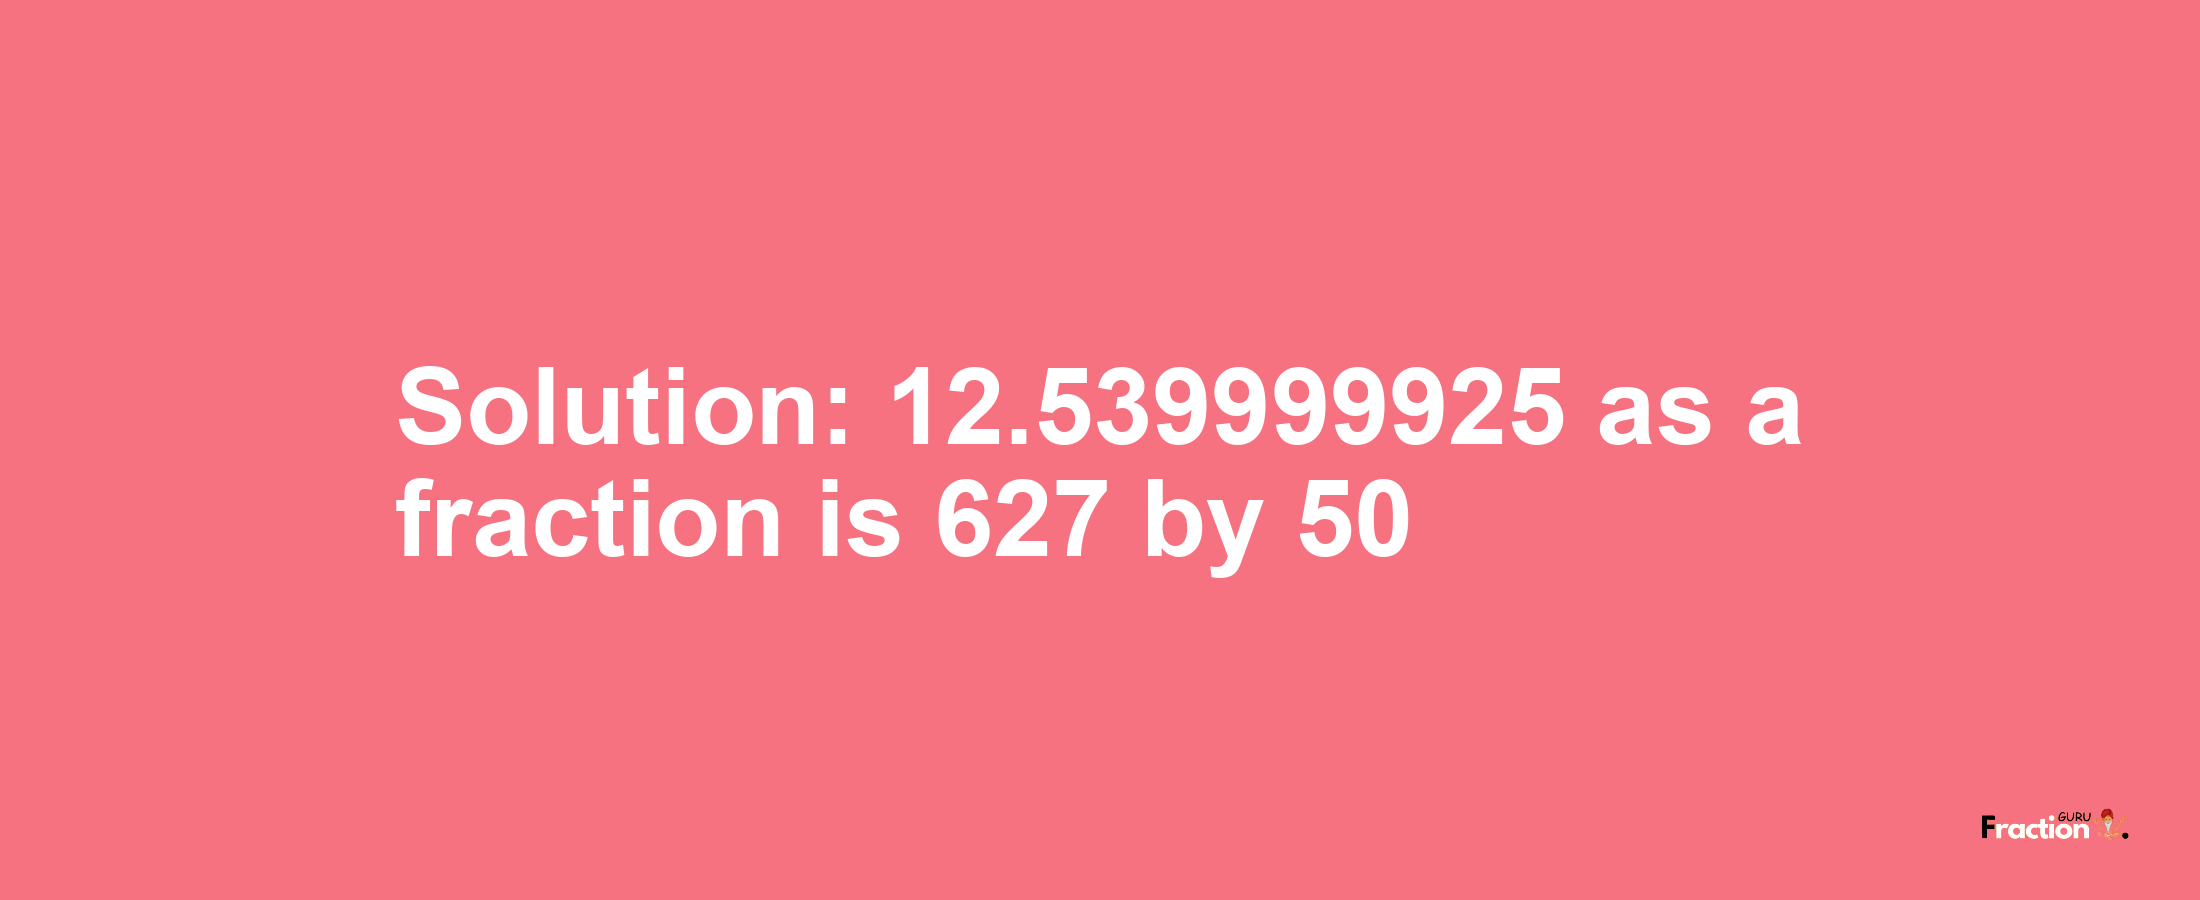 Solution:12.539999925 as a fraction is 627/50